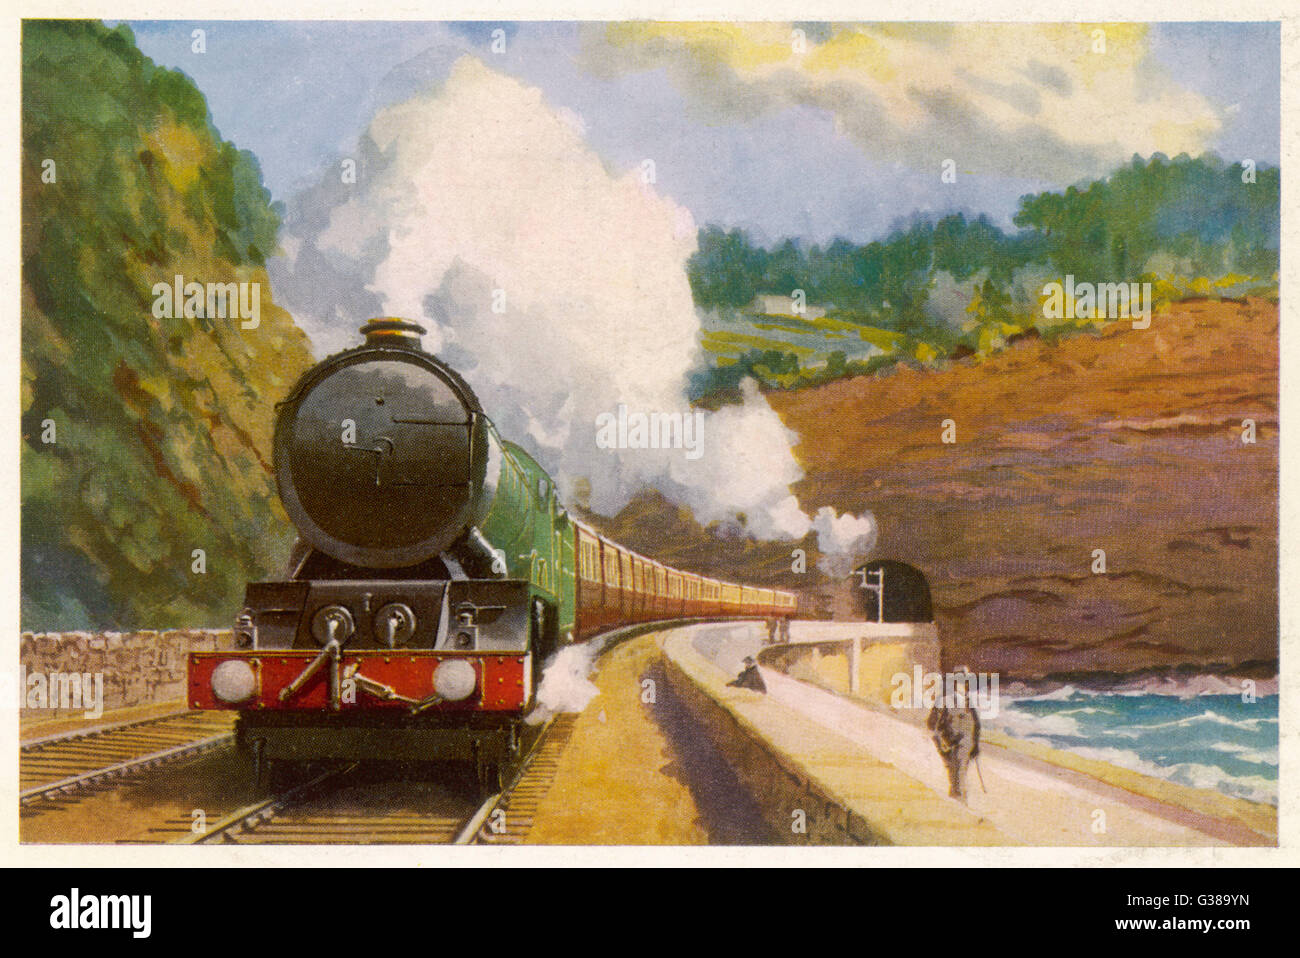 The Cornish Riviera is hauled  by a King class locomotive of  the Great Western Railway.       Date: 1930s? Stock Photo